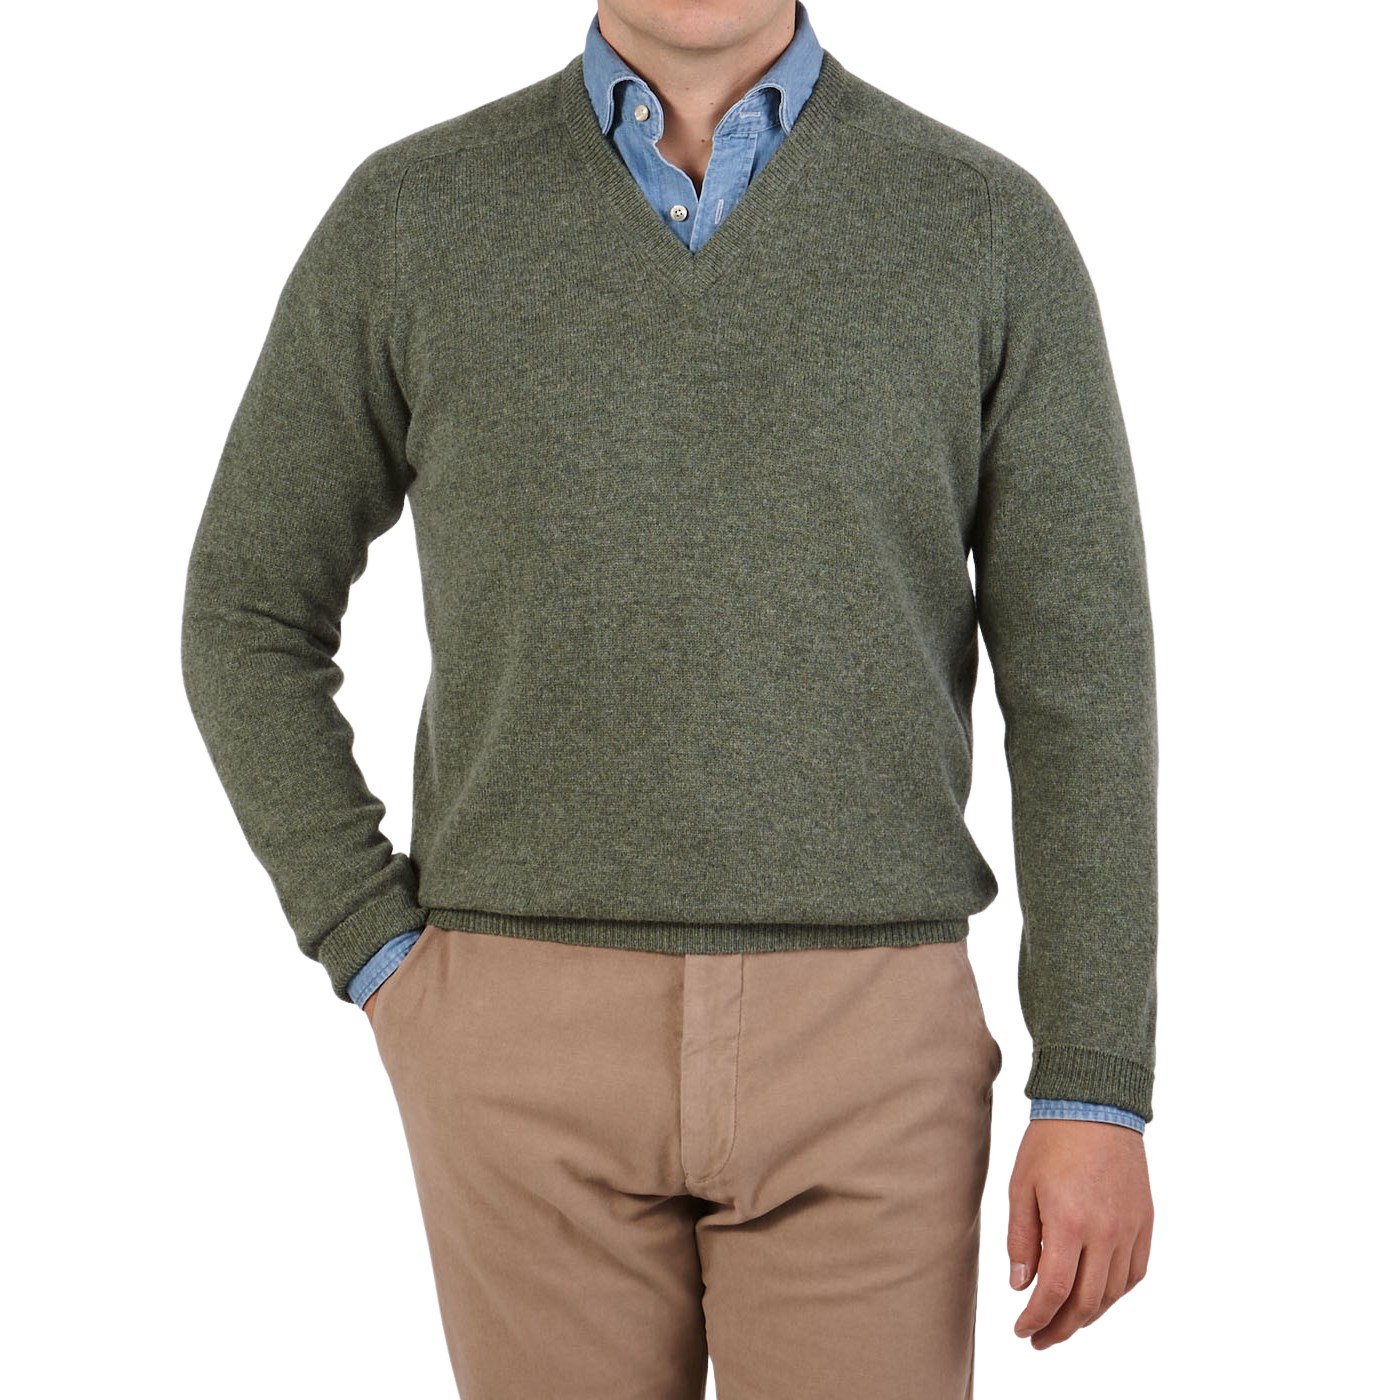 How To Wear A V-Neck Sweater  Men's Style – Alan Paine USA